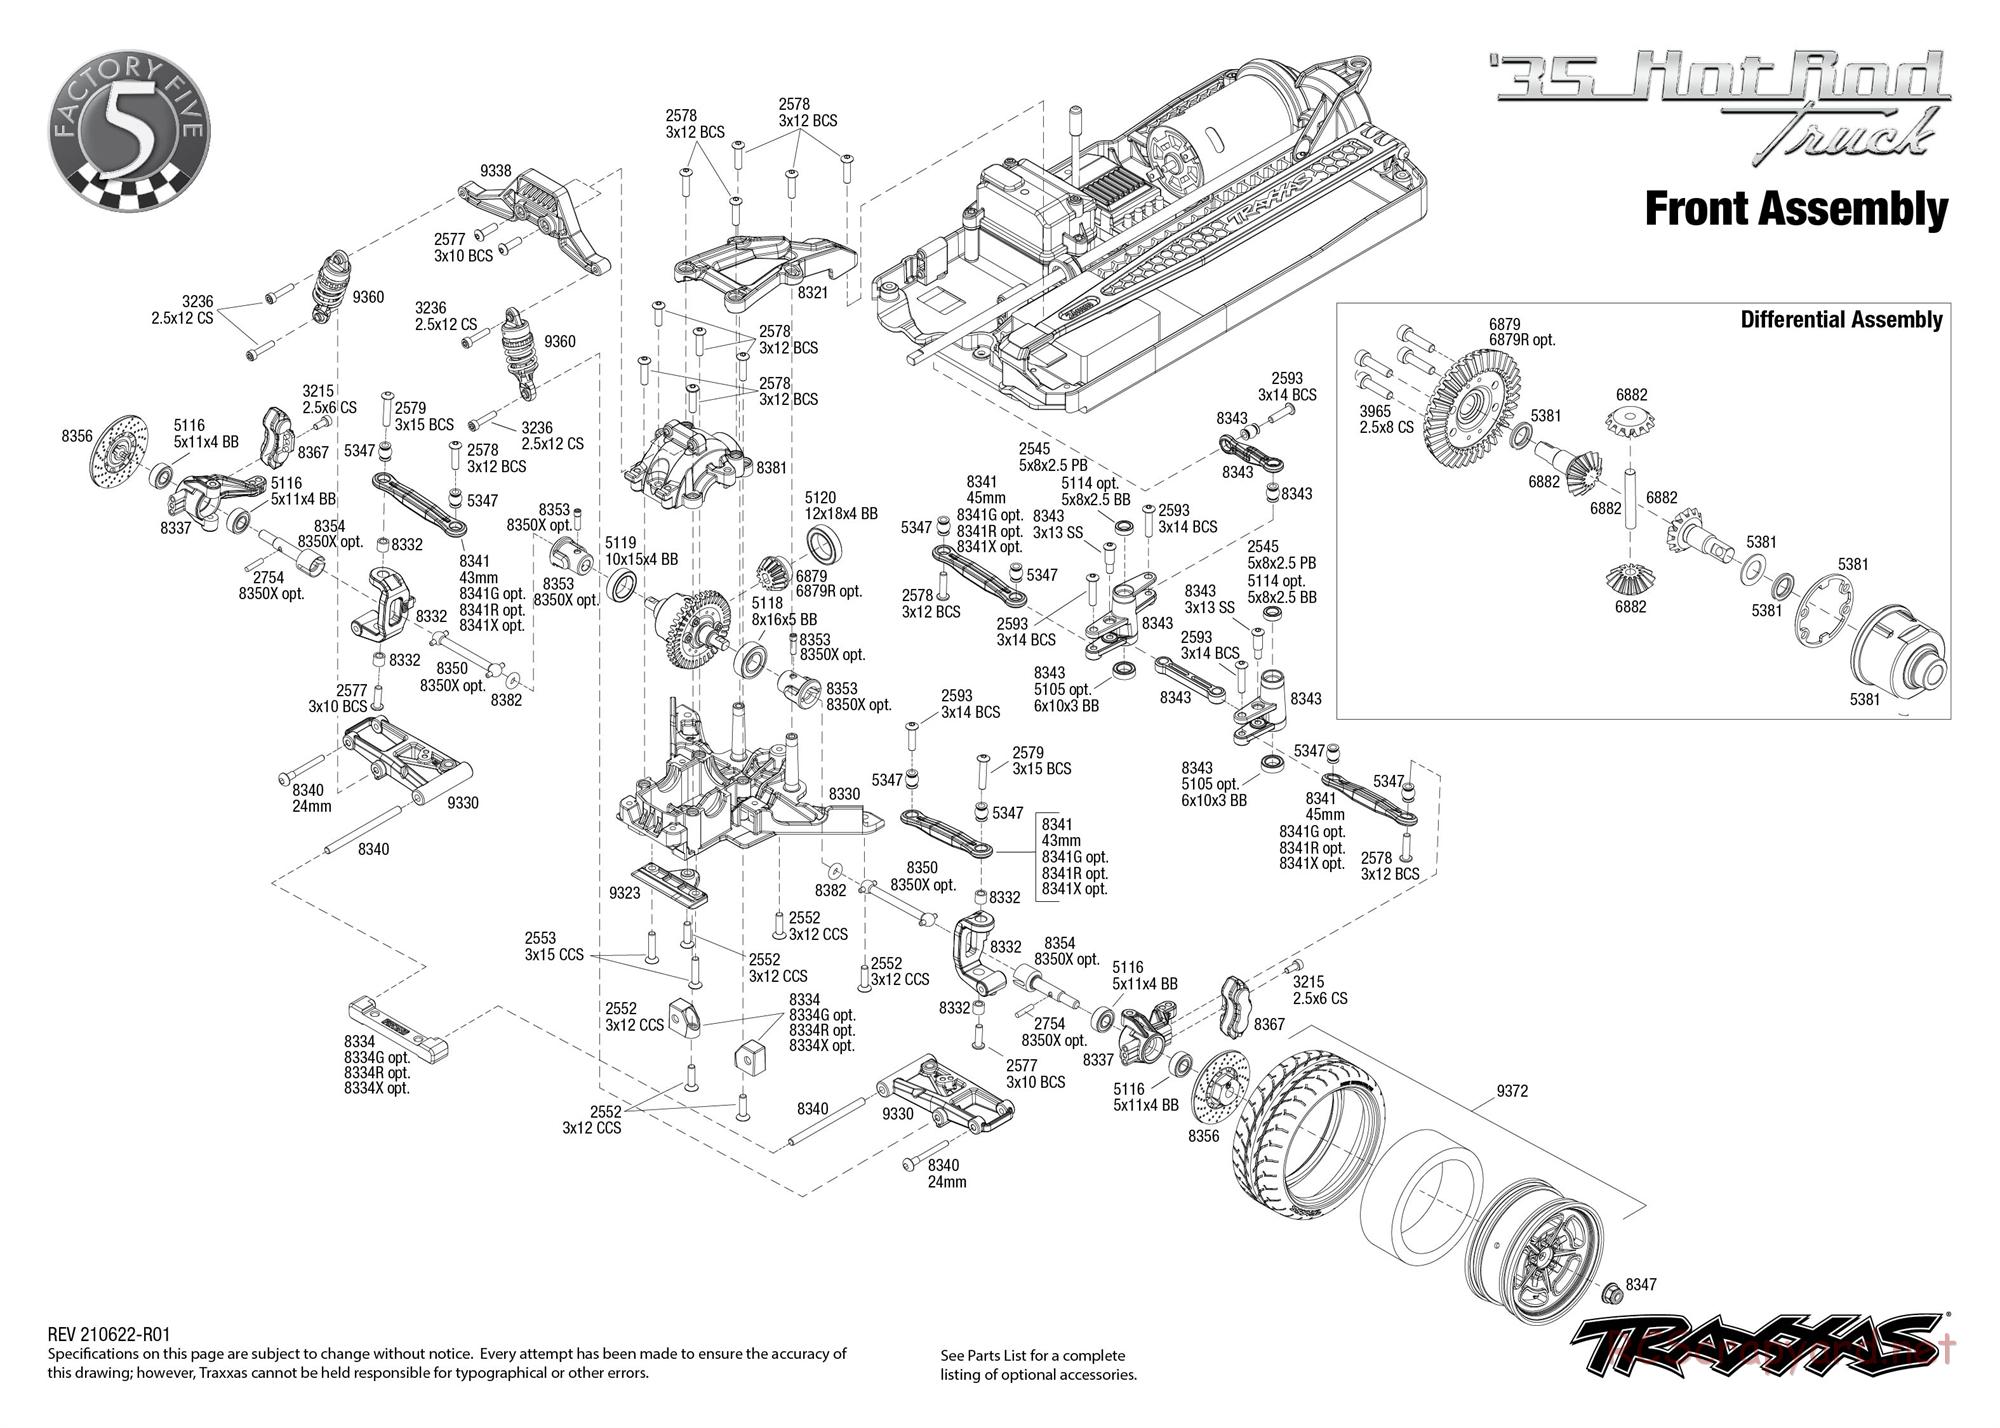 Traxxas - Hot Rod 1935 Truck (2021) - Exploded Views - Page 3